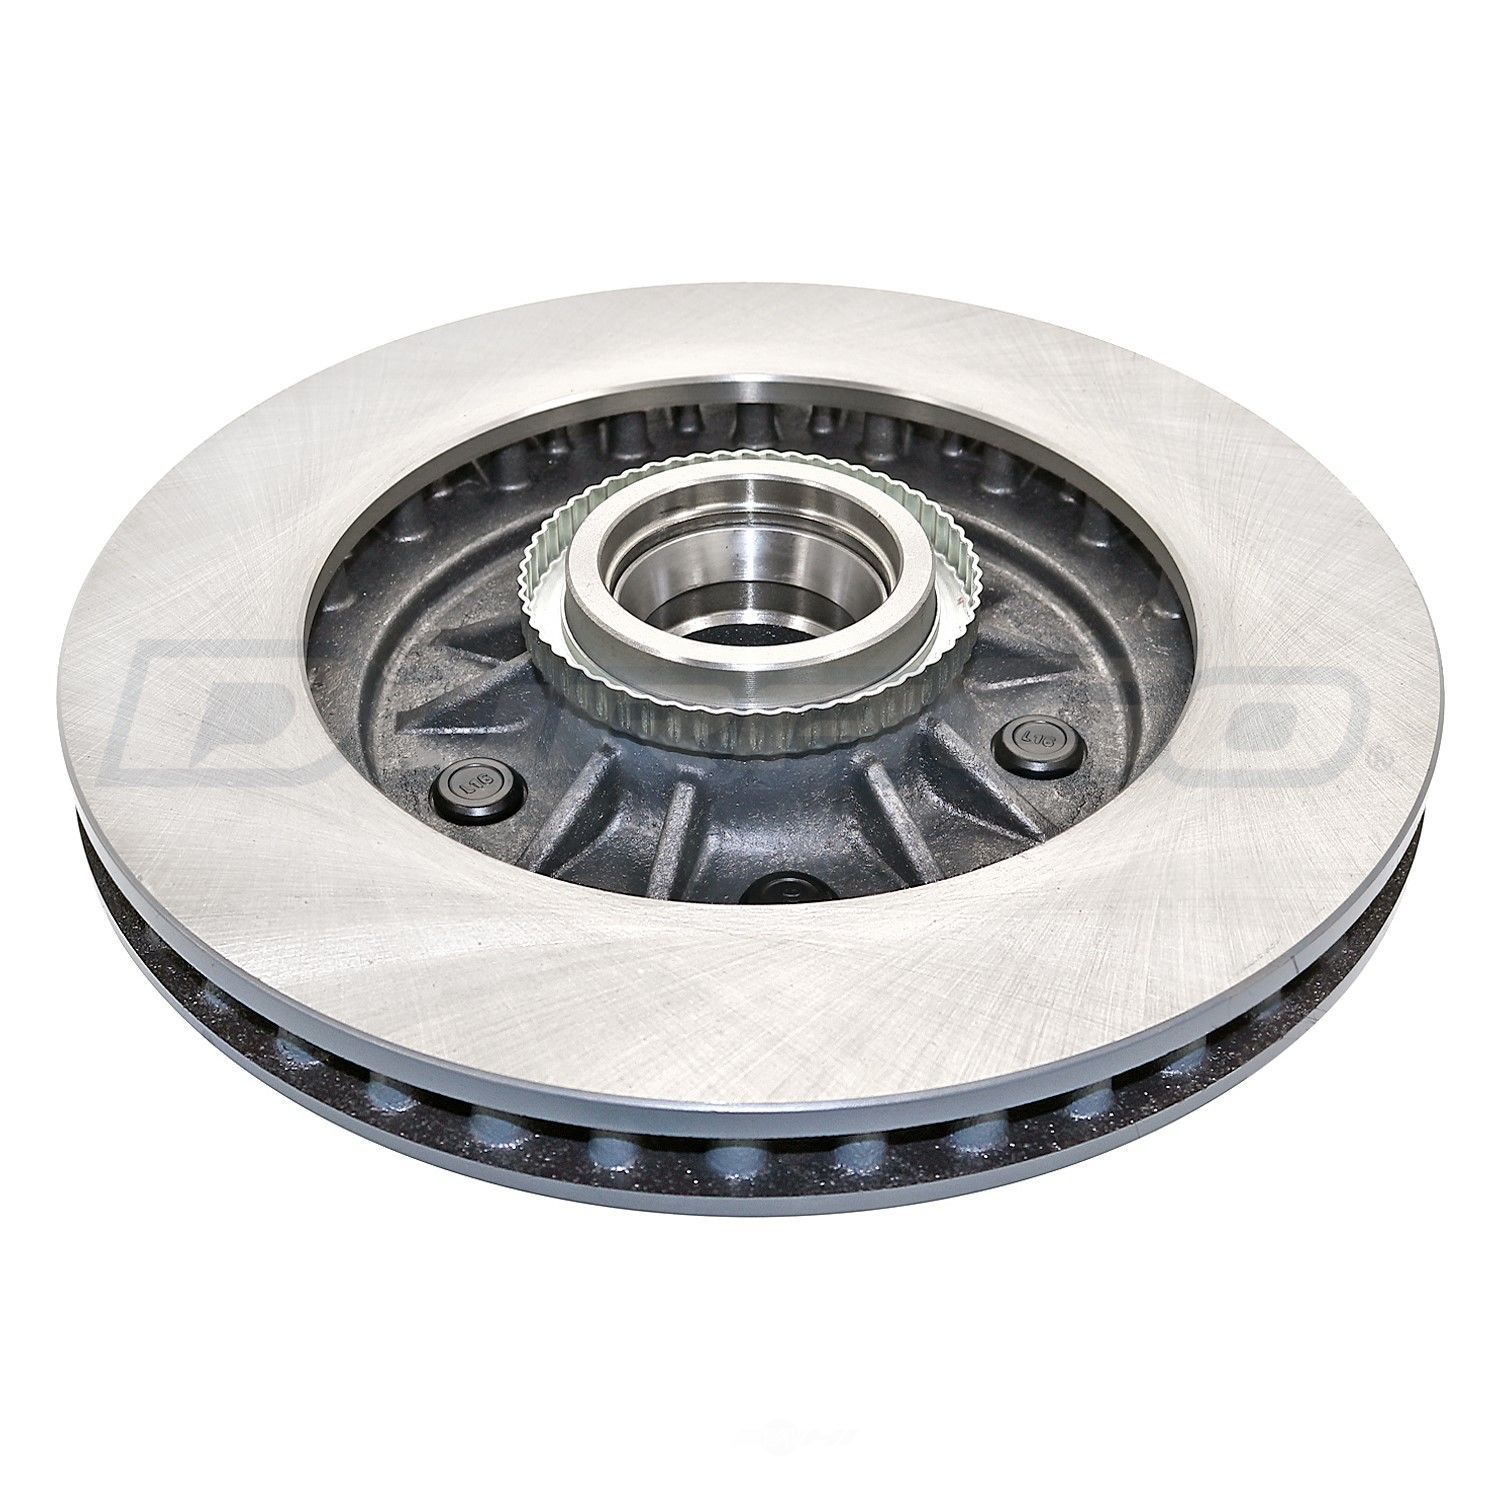 DURAGO TITANIUM SERIES  DTS - Disc Brake Rotor and Hub Assembly - DTS BR54091-01